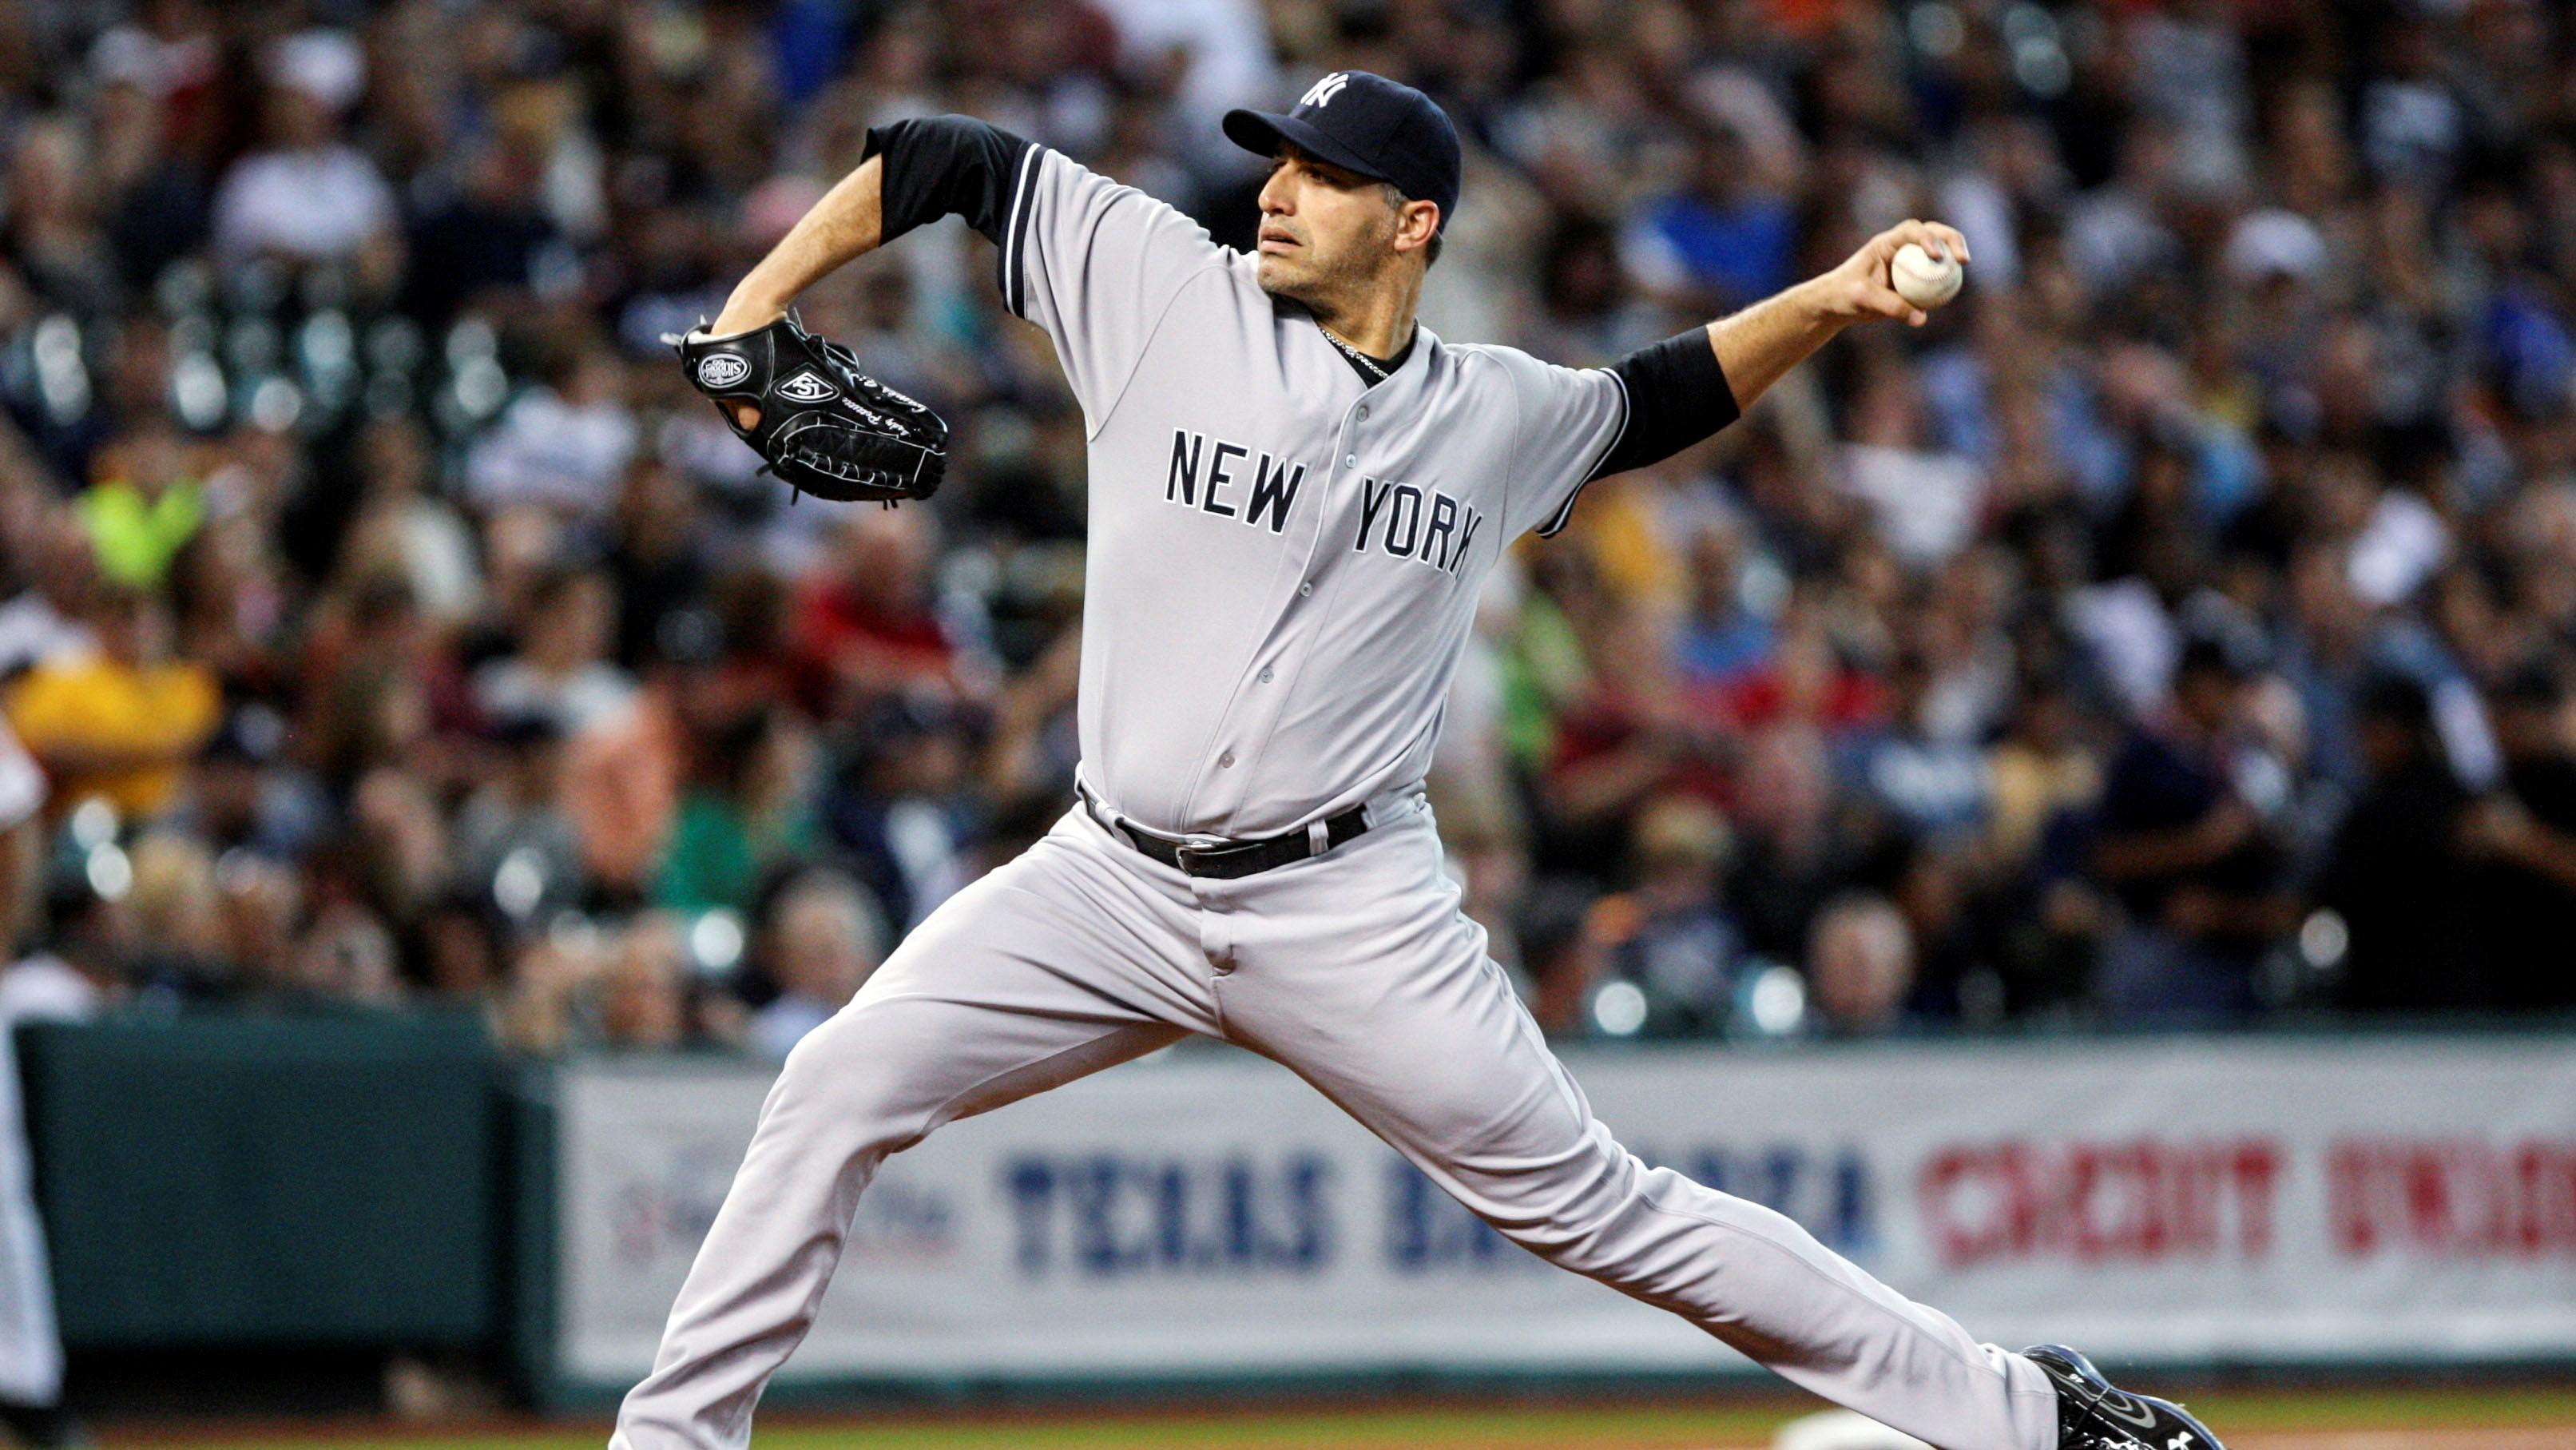 New York Yankees starting pitcher Andy Pettitte (46) pitches during the first inning against the Houston Astros at Minute Maid Park. / Troy Taormina-USA TODAY Sports